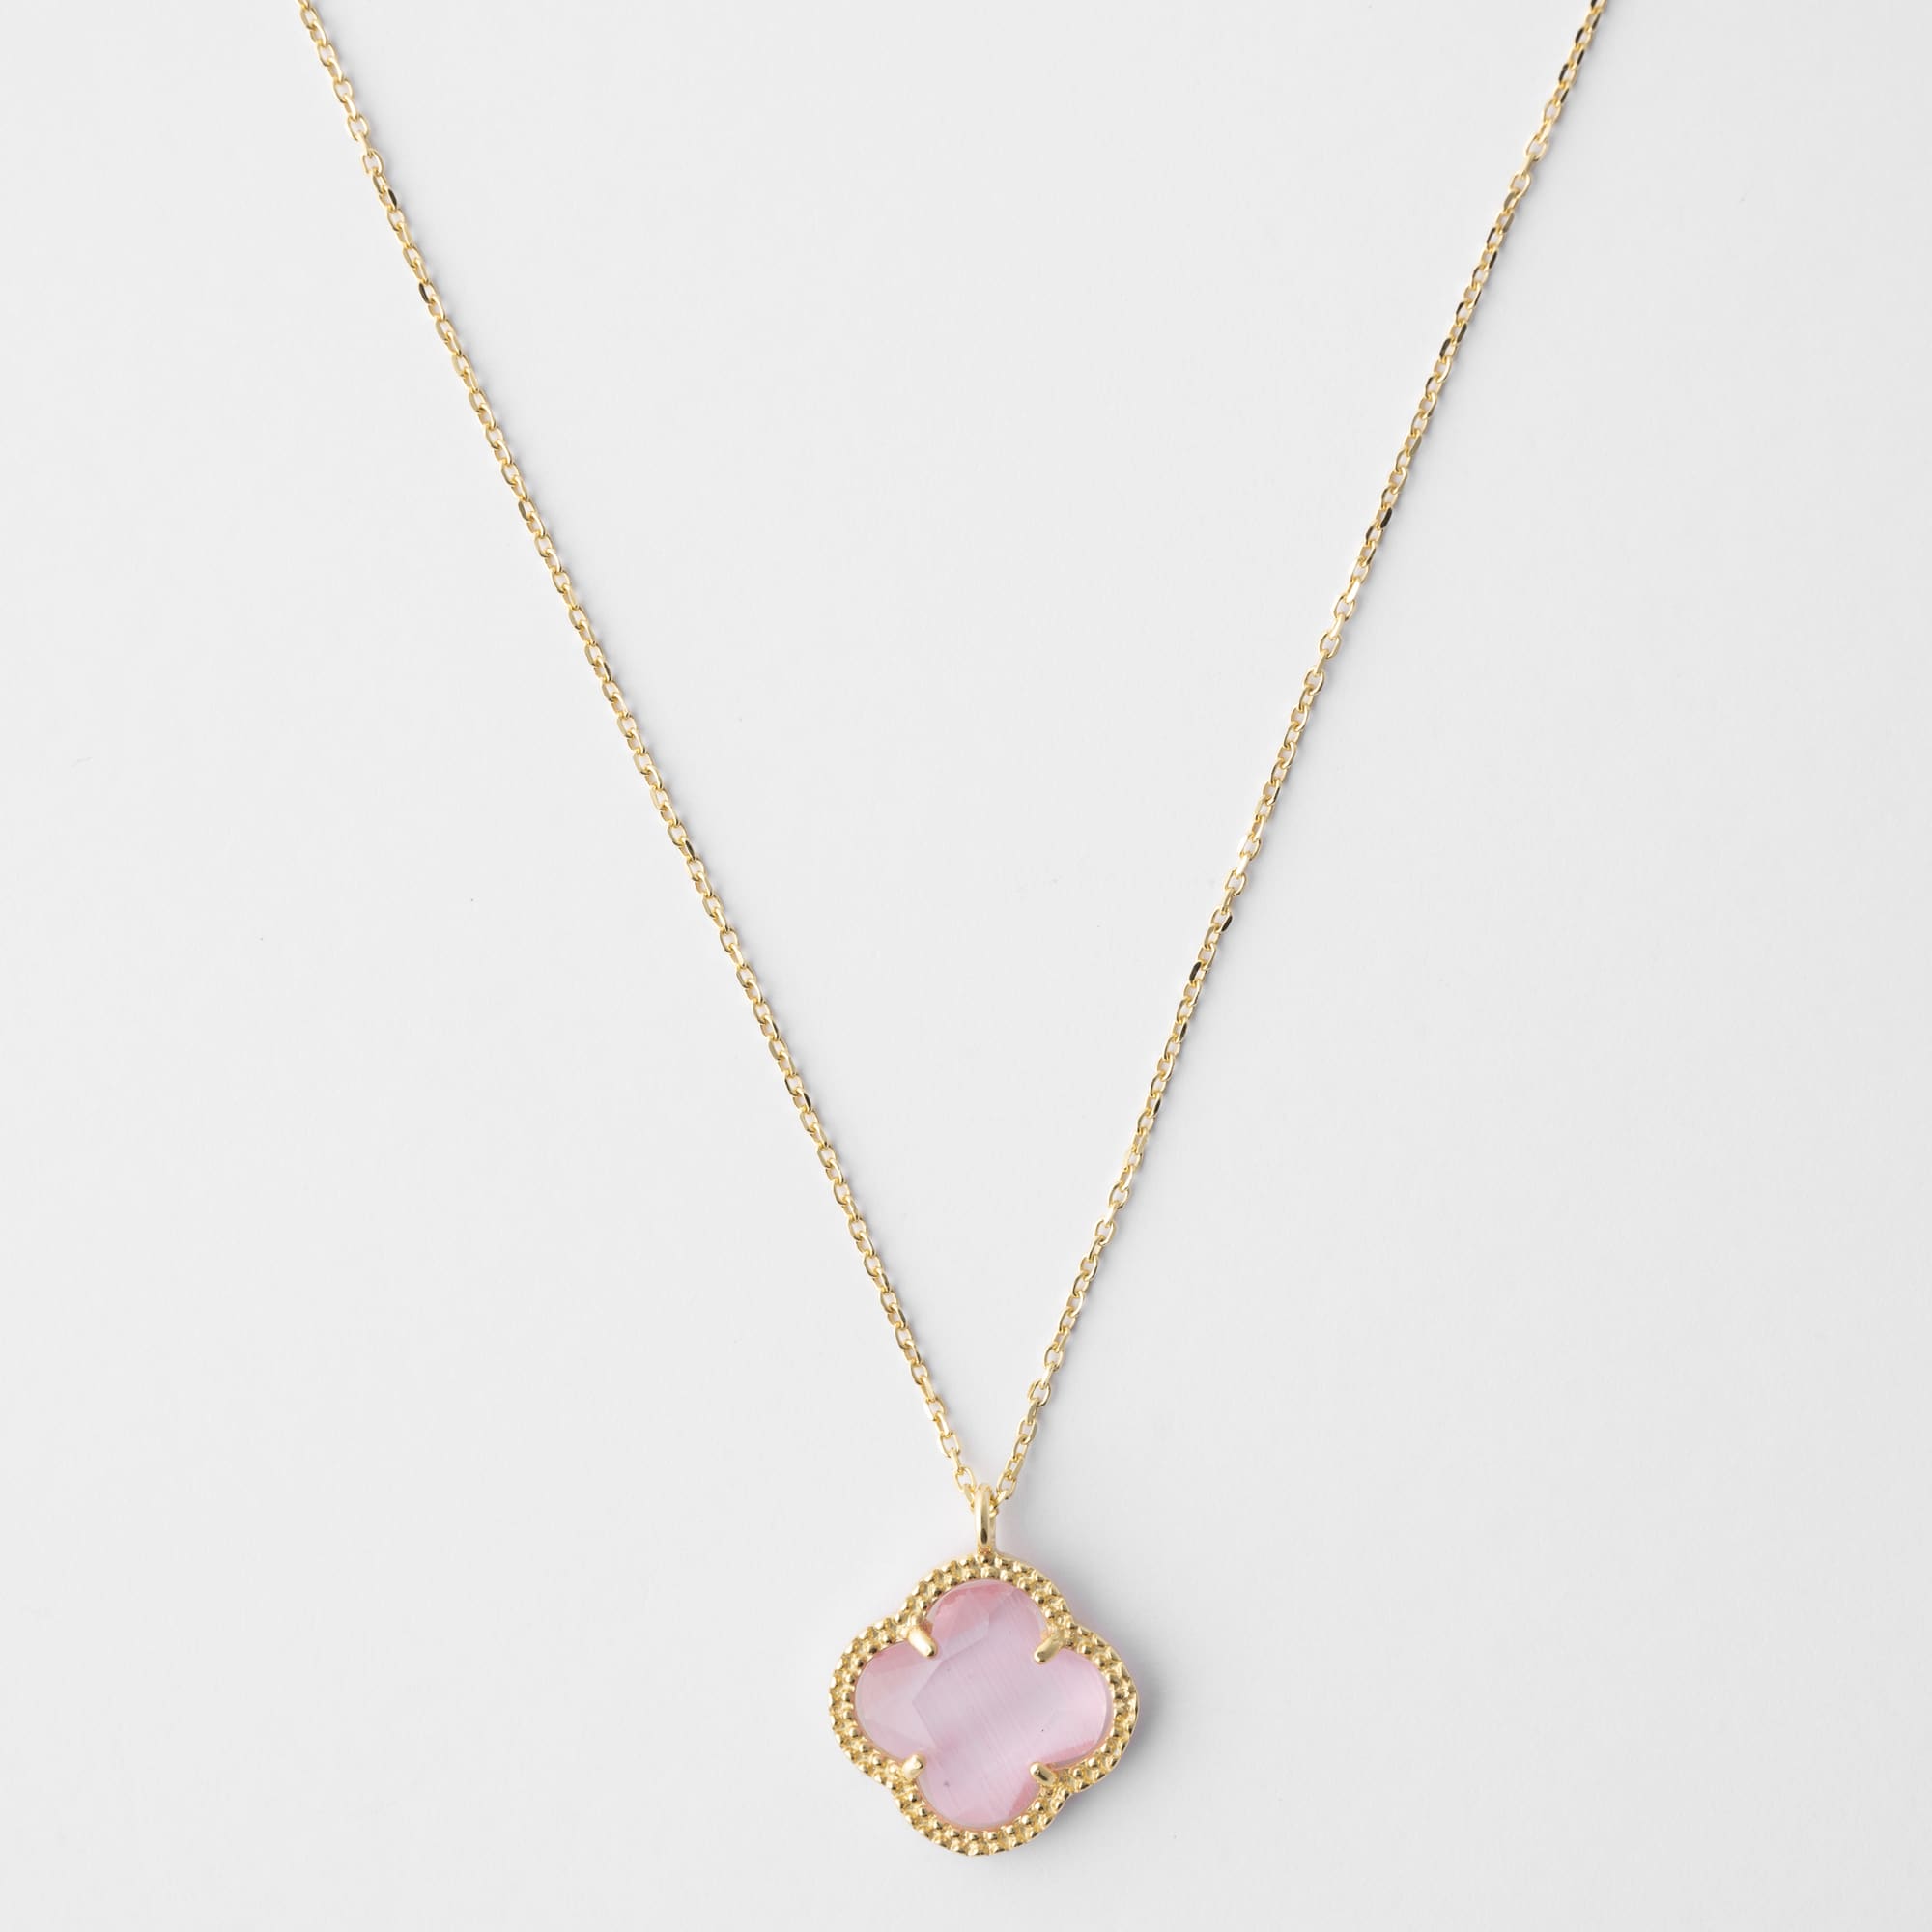 CLOVER Silver Necklace with Pink Quartz